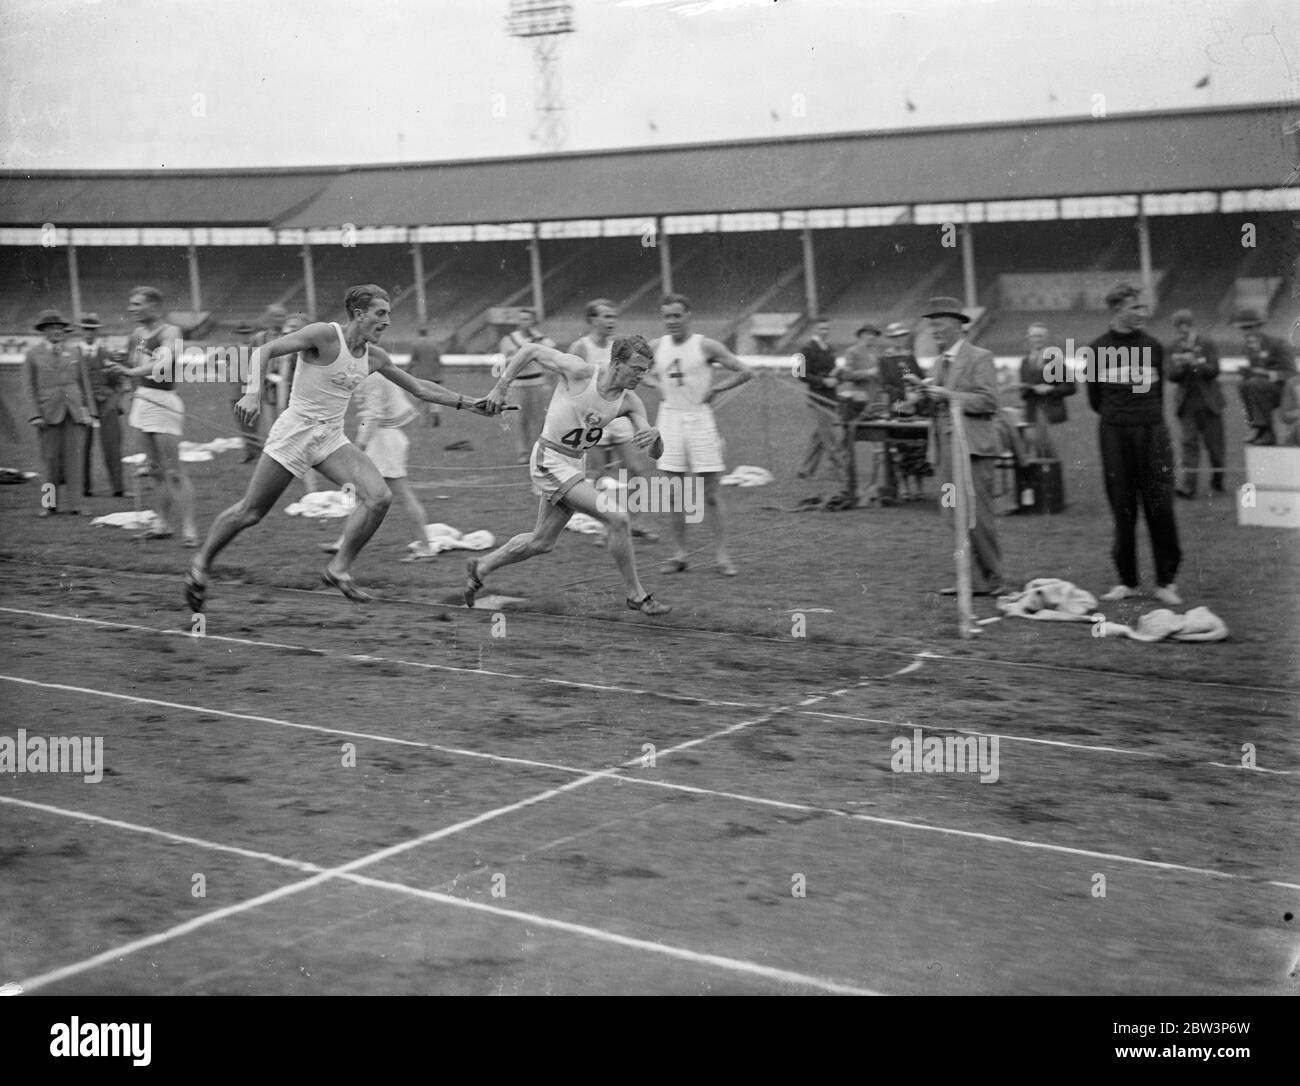 A . G . K . Brown Wins Relay Championship For Achilles At White City . The Amateur Athletic Association Junior championships meeting was held at the White City . One of the chief events was the 4 x 440 yards realy championship between London A . C . and Achilles Club . Brown won for Achilles . Photo Shows : A . G . K . Brown ( Achilles ) , the famous athlete , teking over from I . S . Ivanovic ( behind ) to win . 4 Jul 1936 Stock Photo